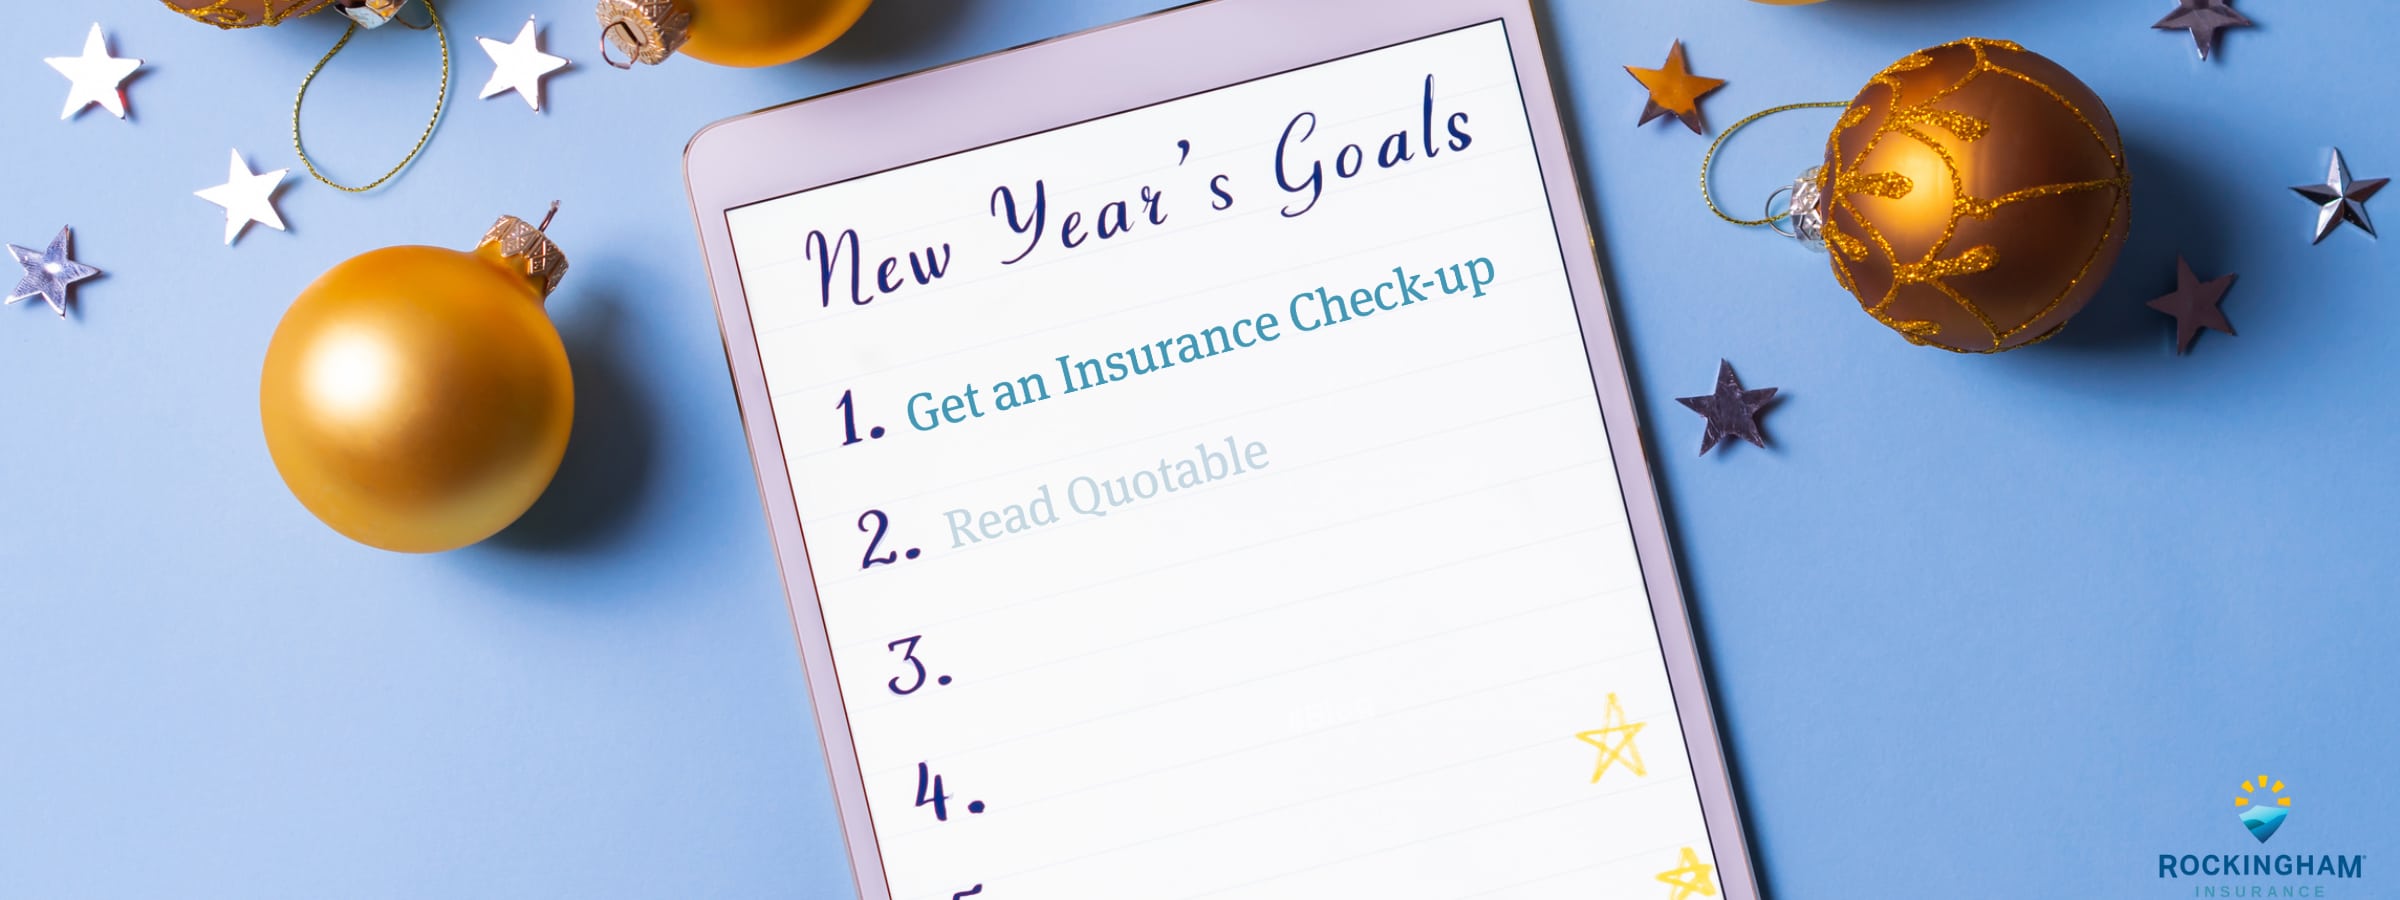 Some New Year’s Resolutions You’ll Want to Keep